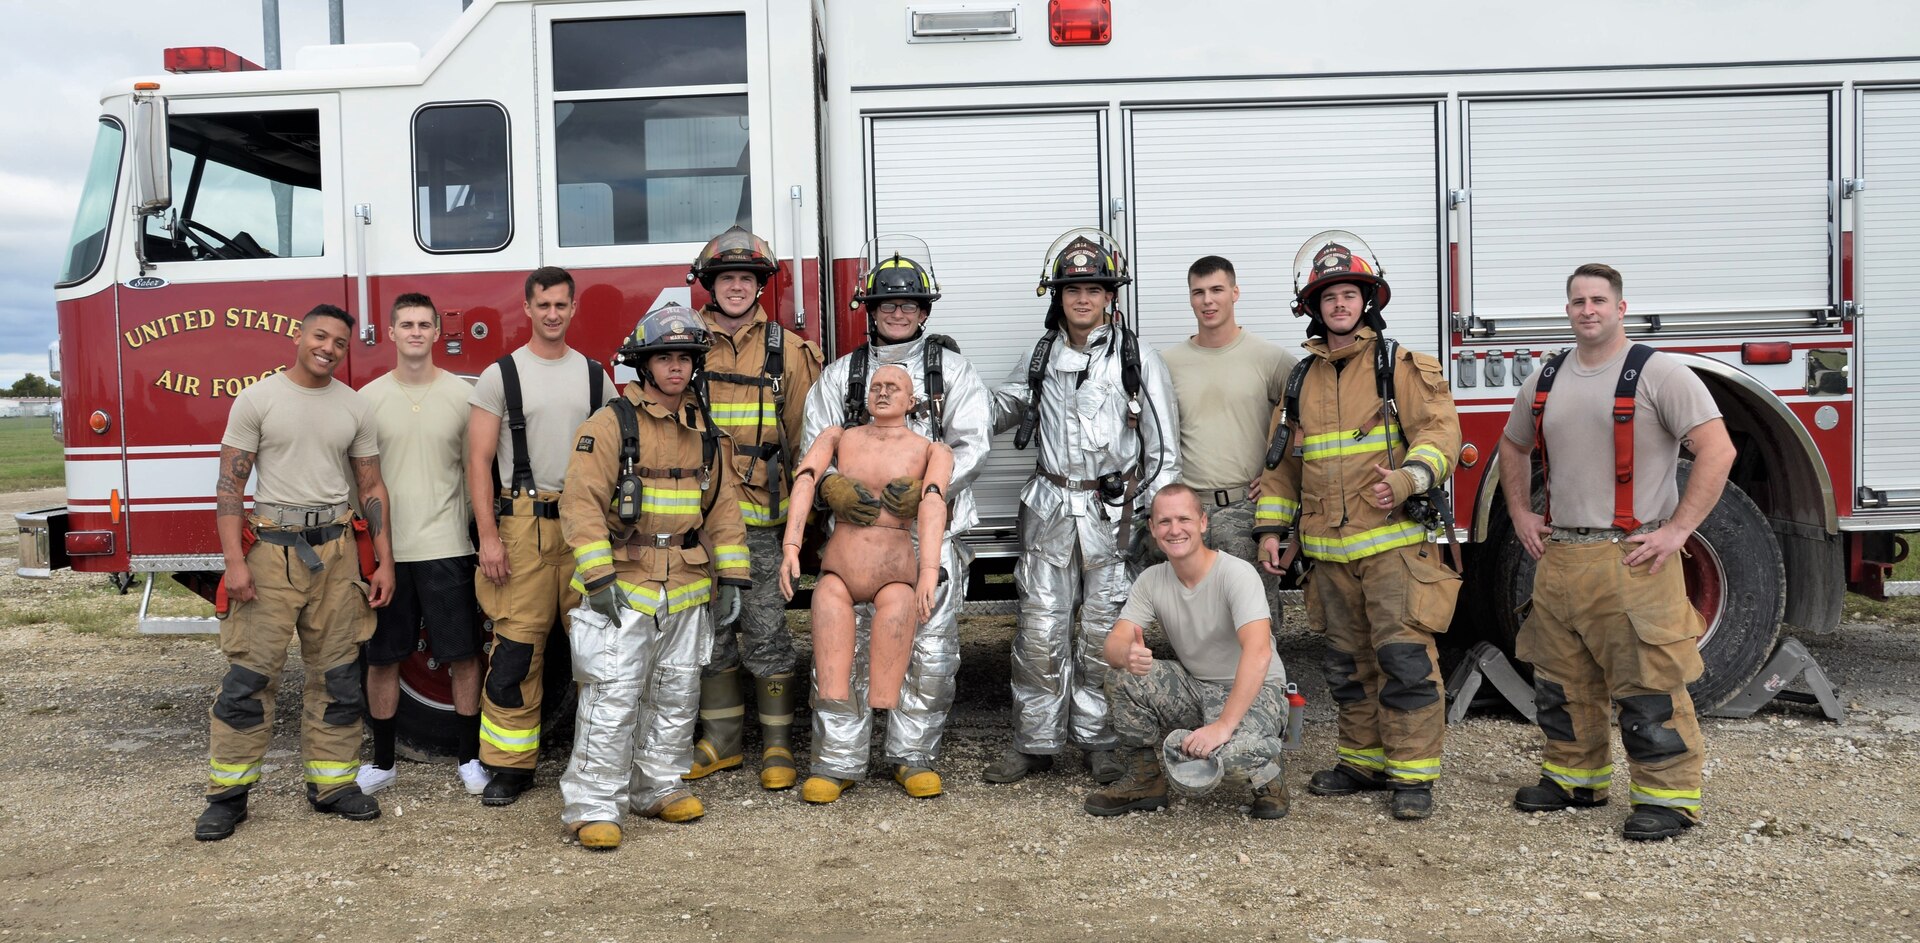 Members of the 902nd Security Forces Squadron and 502nd Civil Engineer Squadron participated in the firefighter fitness challenge portion of the Battle of the Badges competition Oct. 20, 2018, at Joint Base San Antonio-Randolph’s Camp Talon. The initiative was designed to build stronger bonds between the agencies and has become a tradition for the unit members, their families and friends.